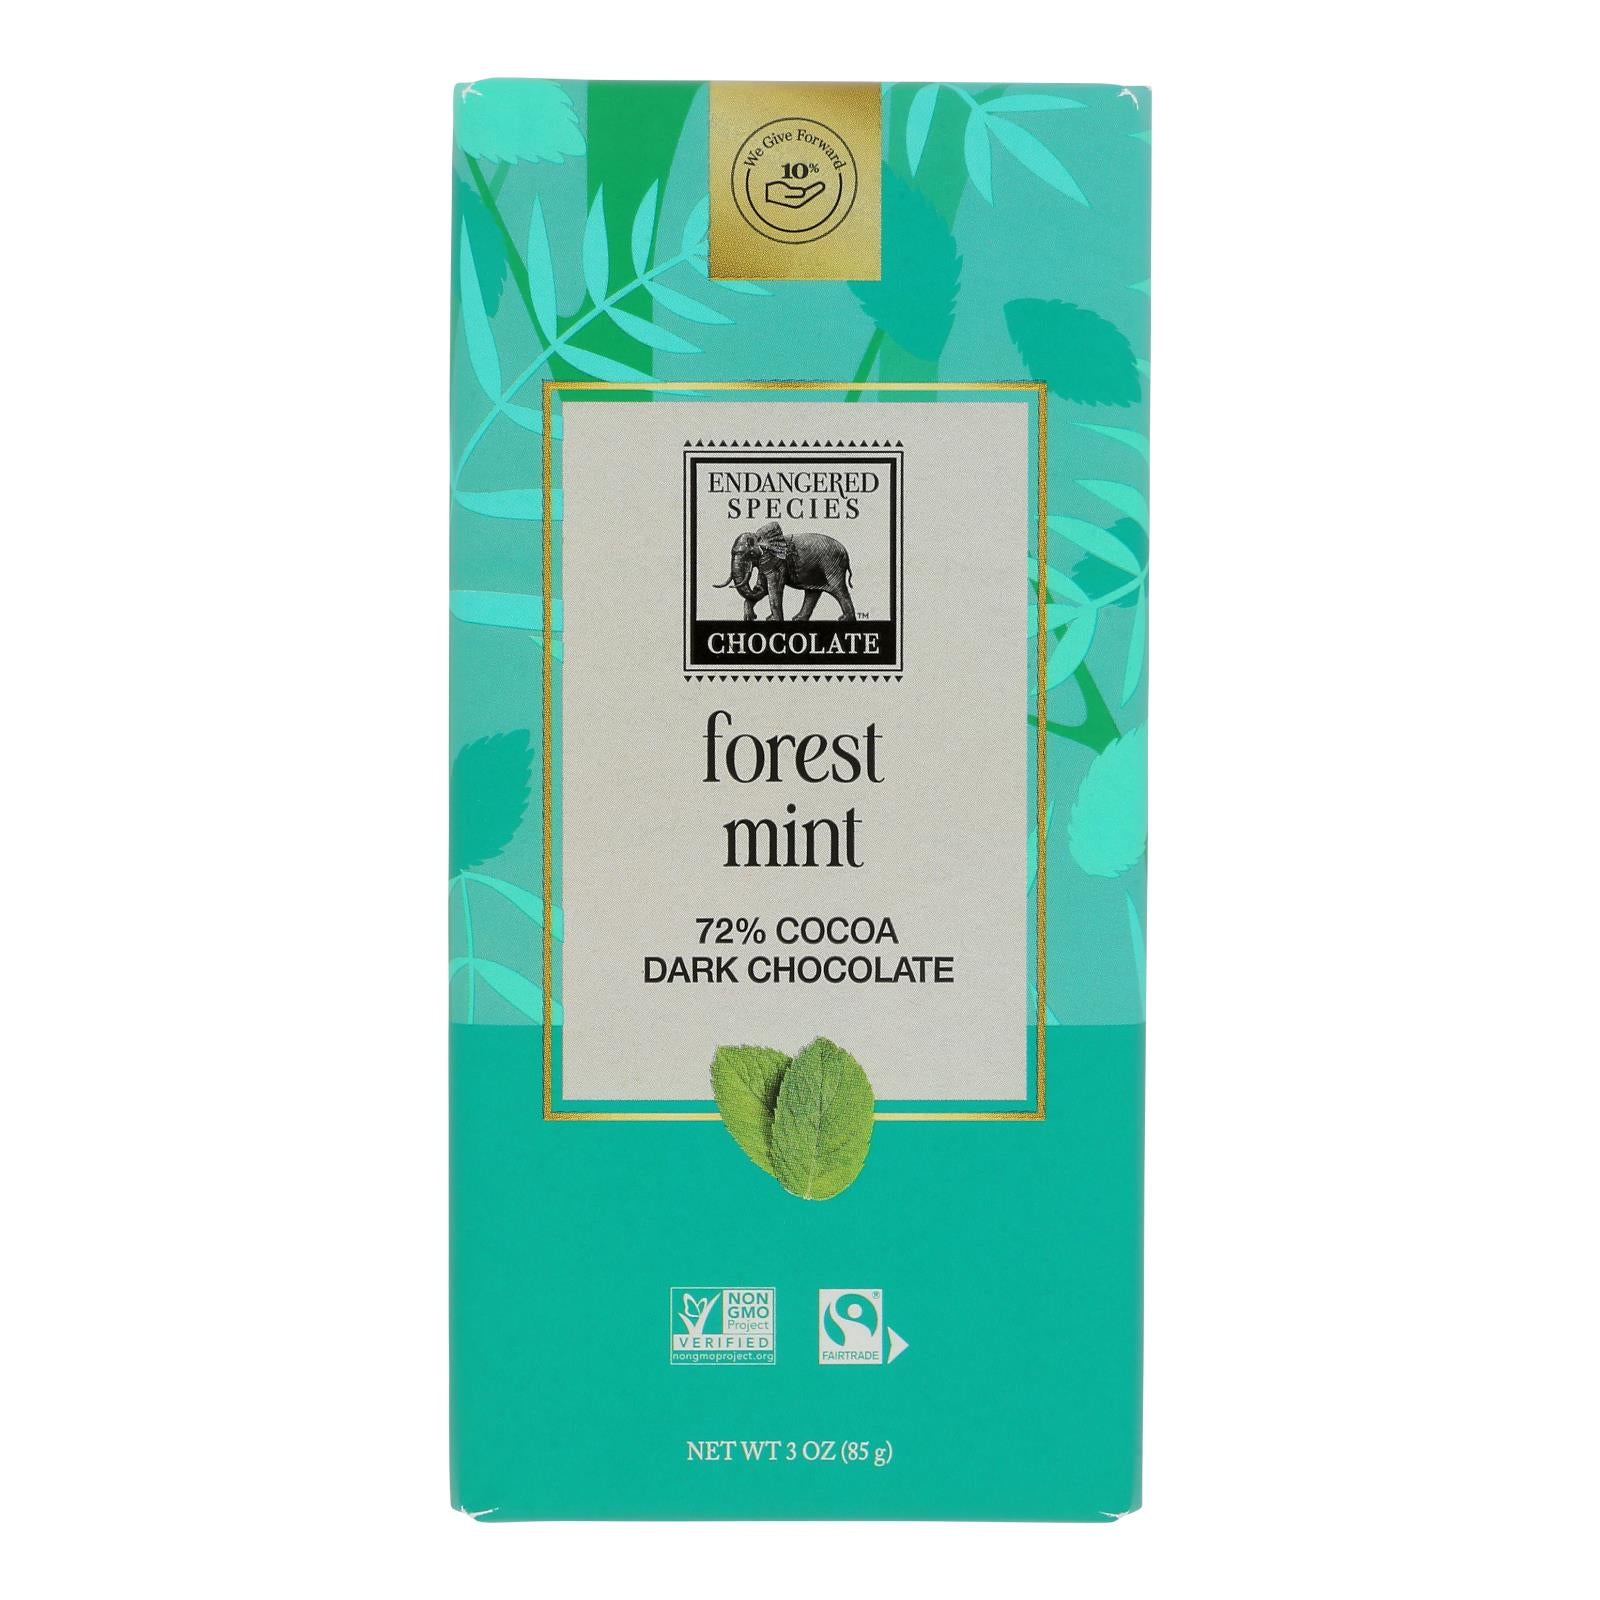 Endangered Species Natural Chocolate Bars - Dark Chocolate - 72 Percent Cocoa - Forest Mint - 3 oz Bars - Case of 12